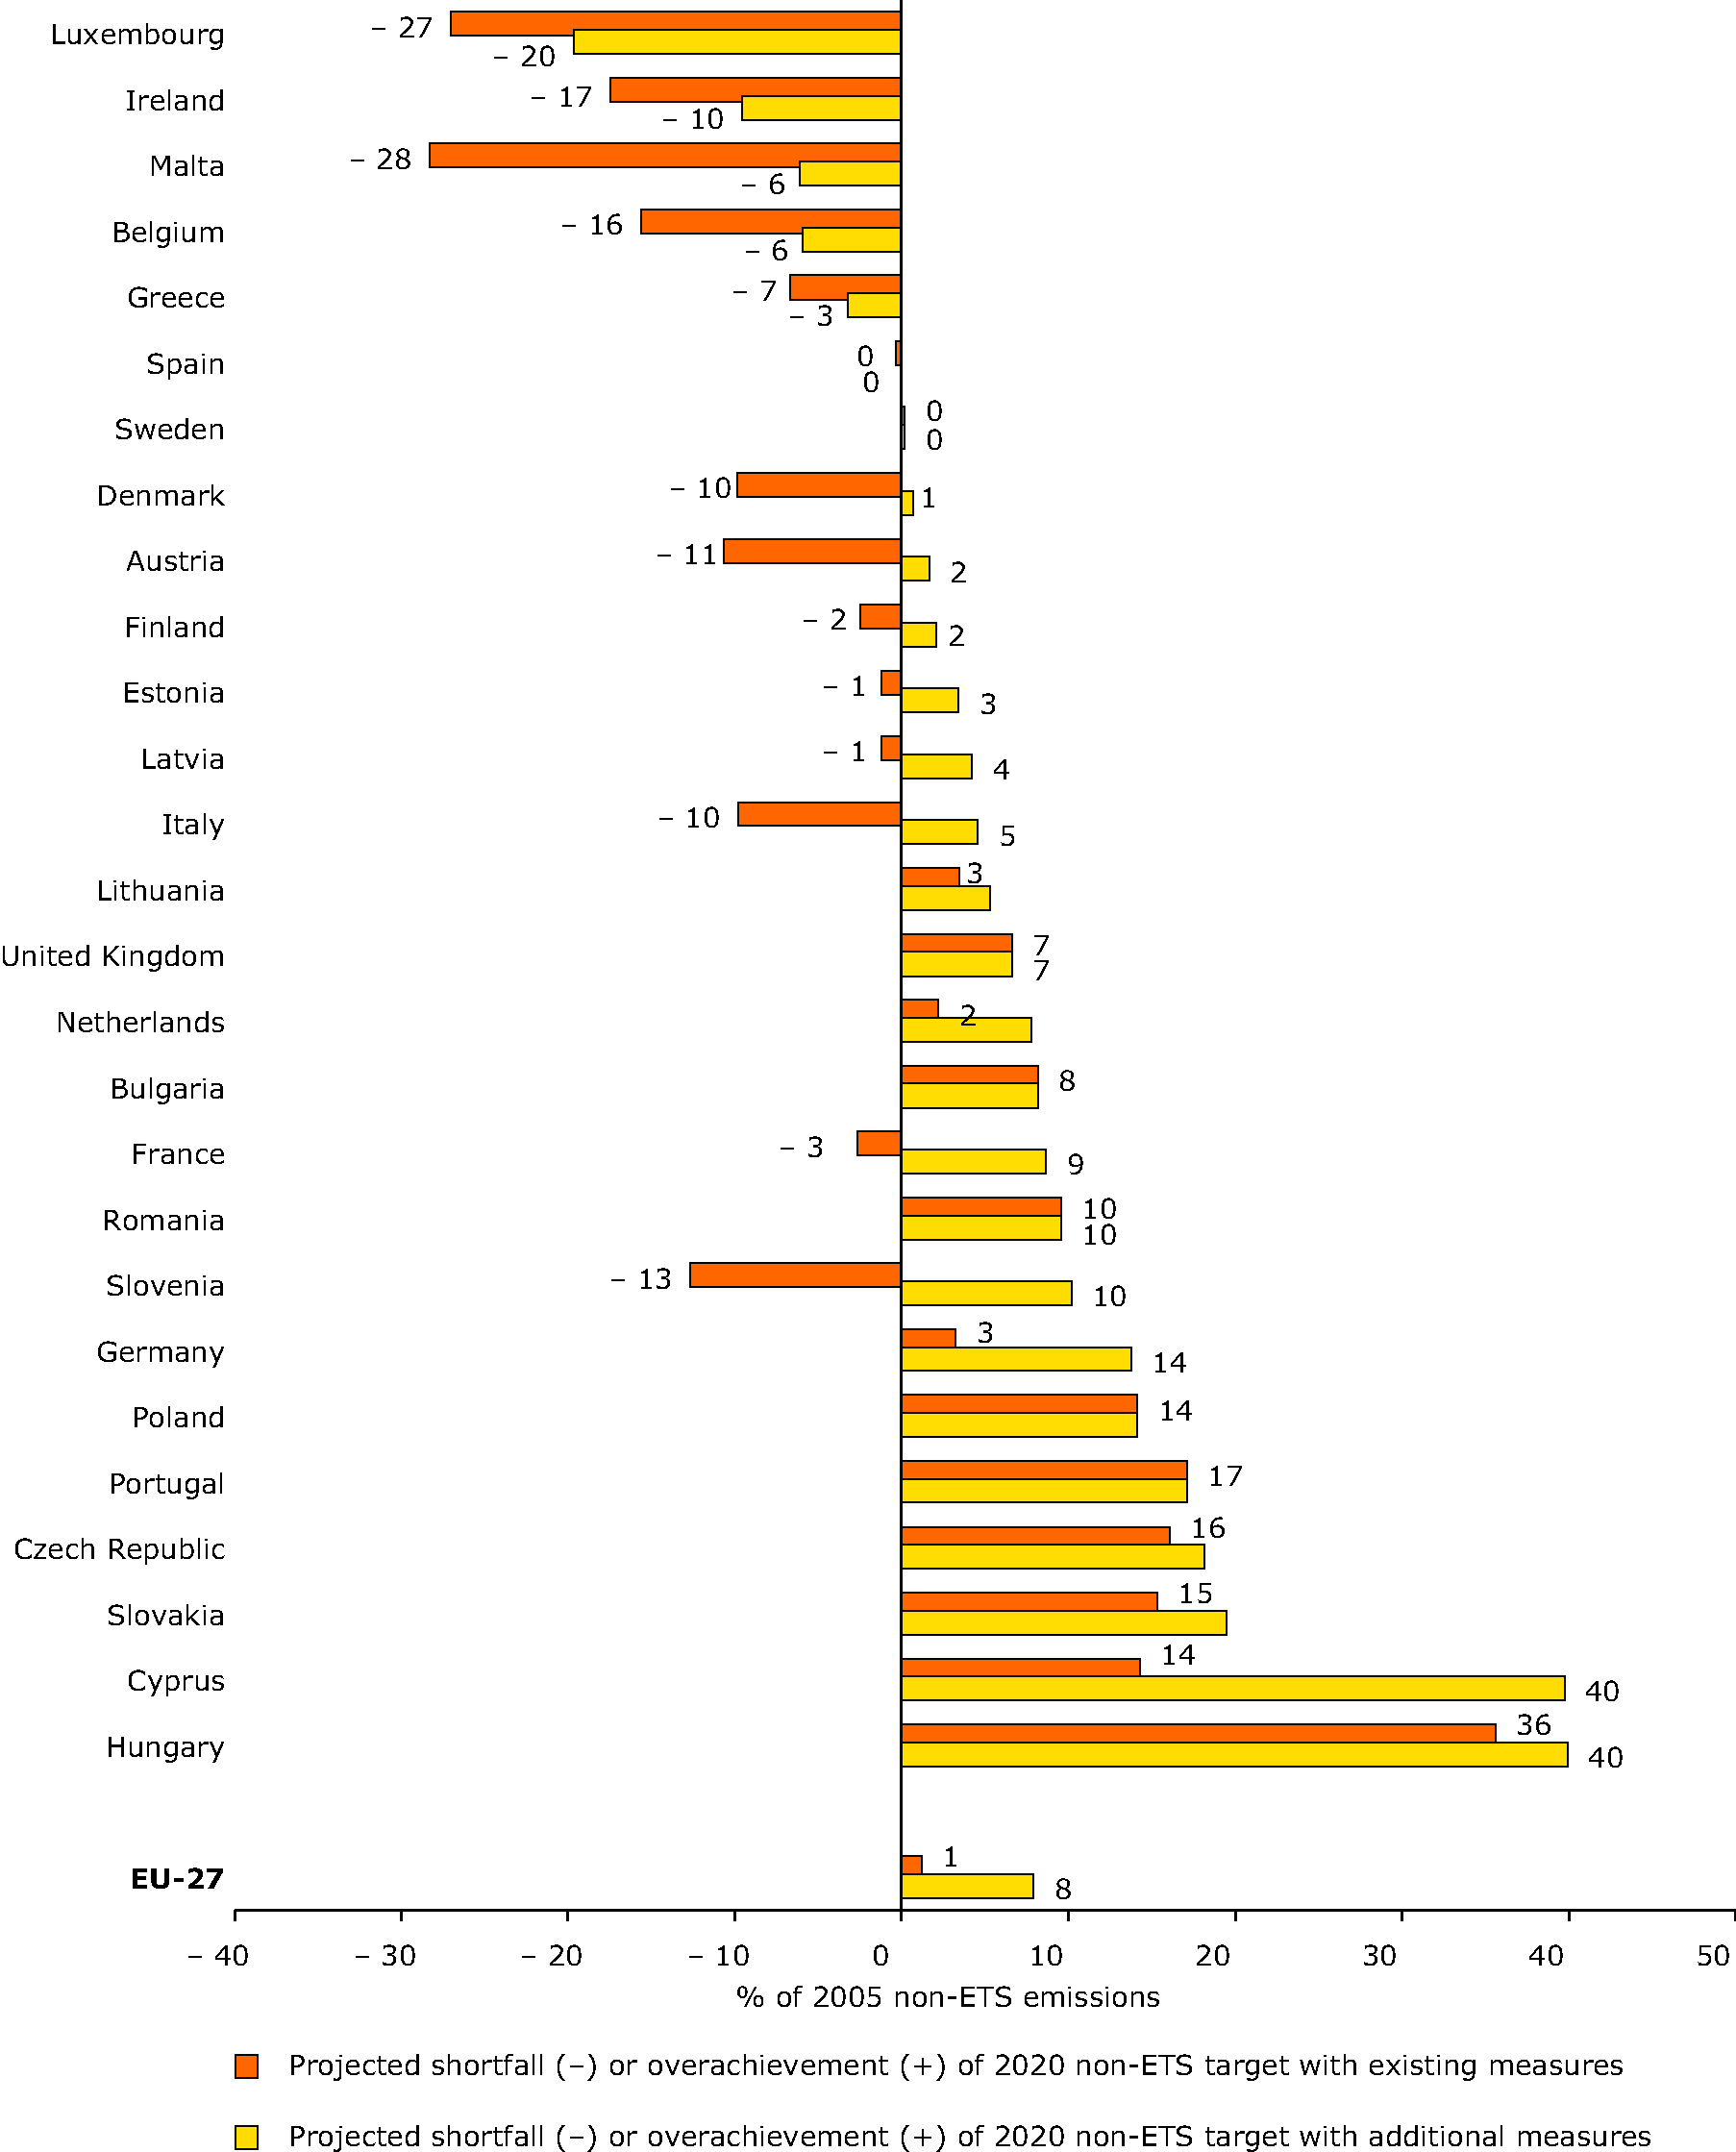 Projected gaps between 2020 GHG emissions and national targets in sectors not covered by the EU ETS